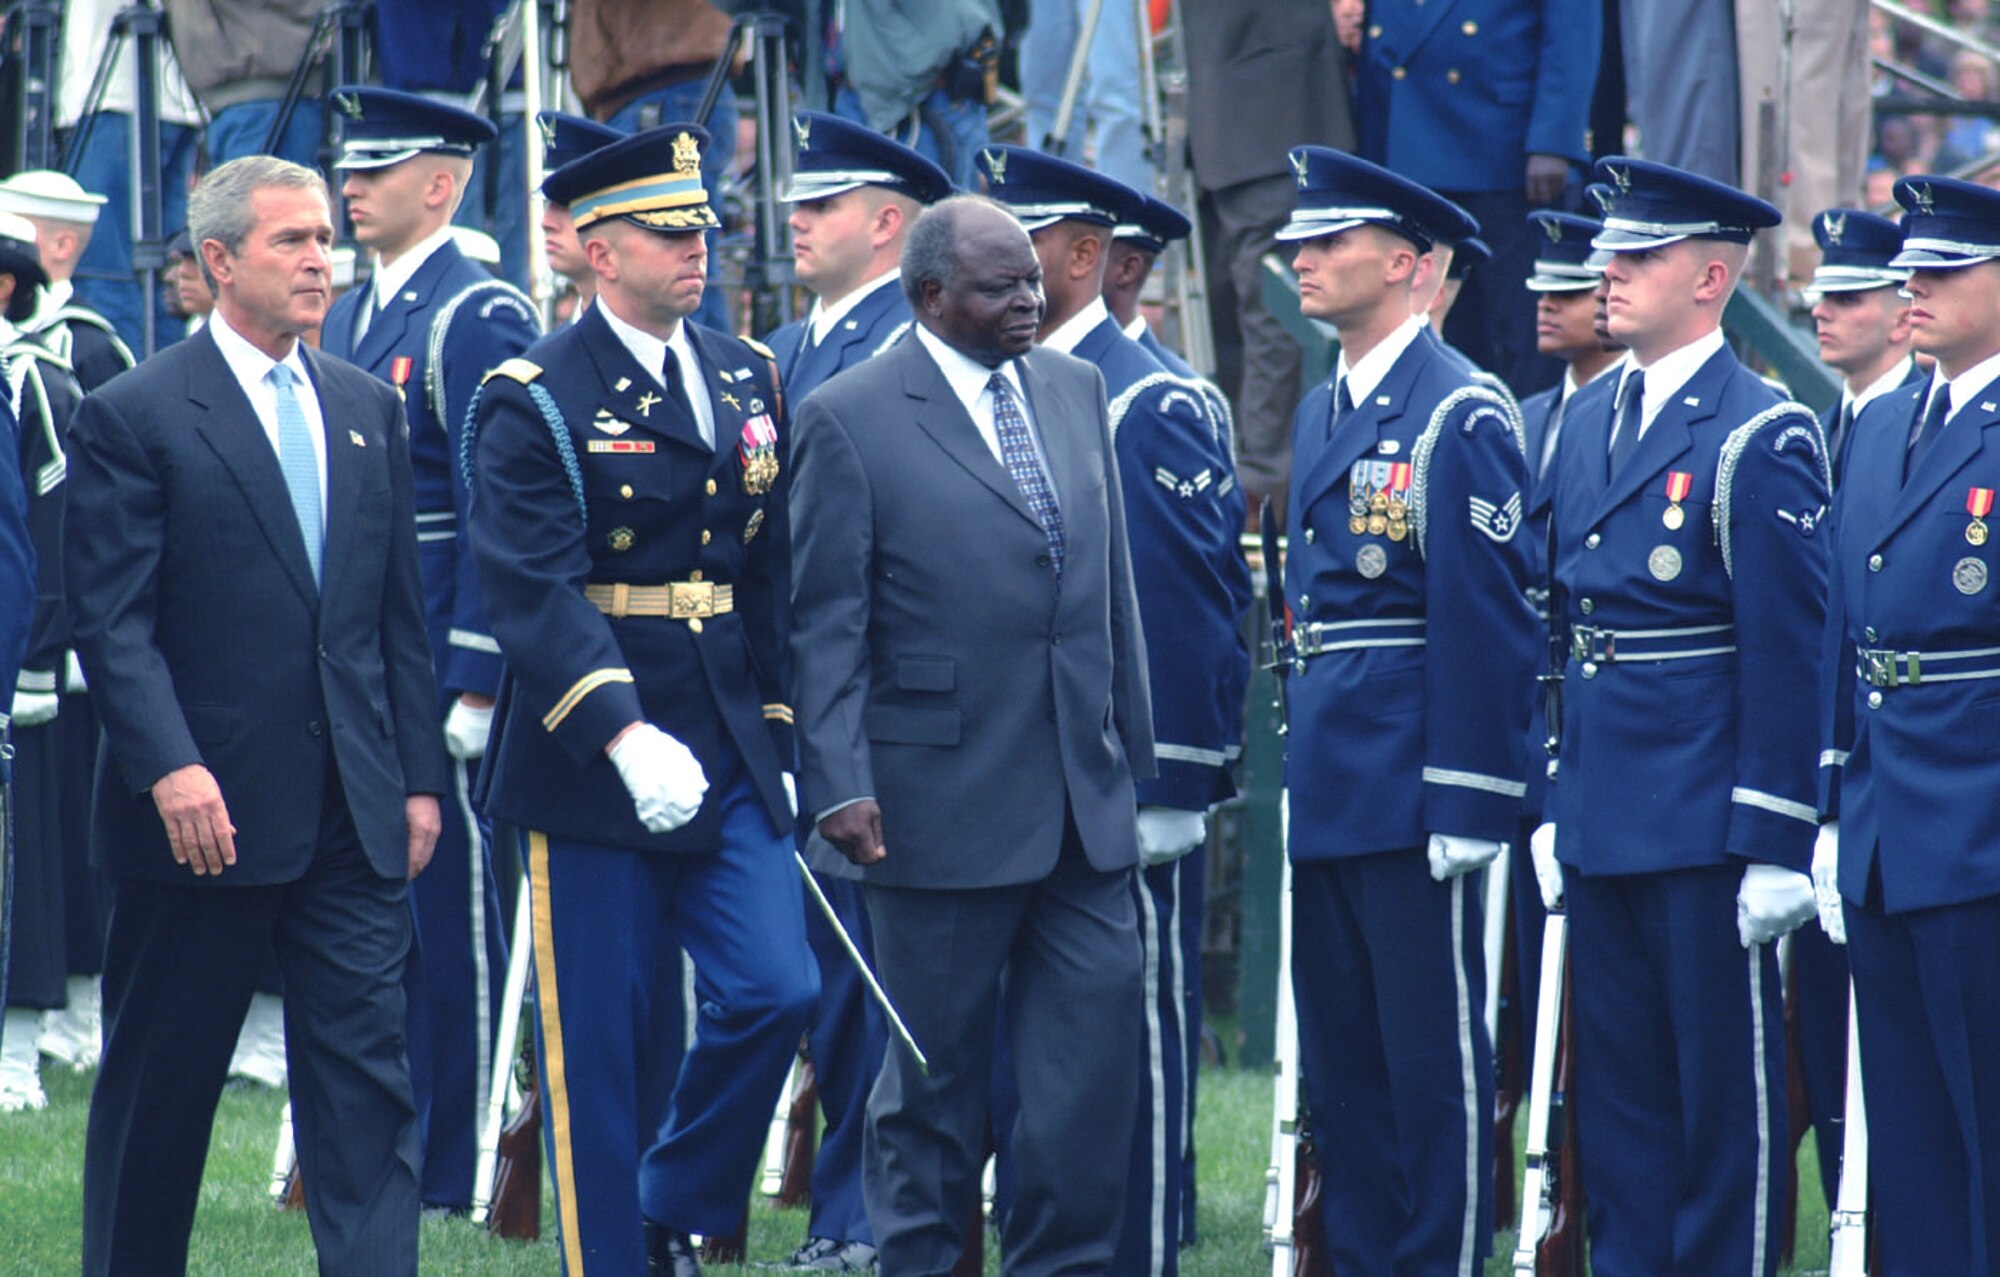 WASHINGTON -- President George W. Bush and Mwai Kibaki, Kenya's head of state, pass in front of the Air Force Honor Guard during an arrival ceremony on the south lawn of the White House recently.  (U.S. Air Force photo by Senior Airman Stacey R. Thomas)